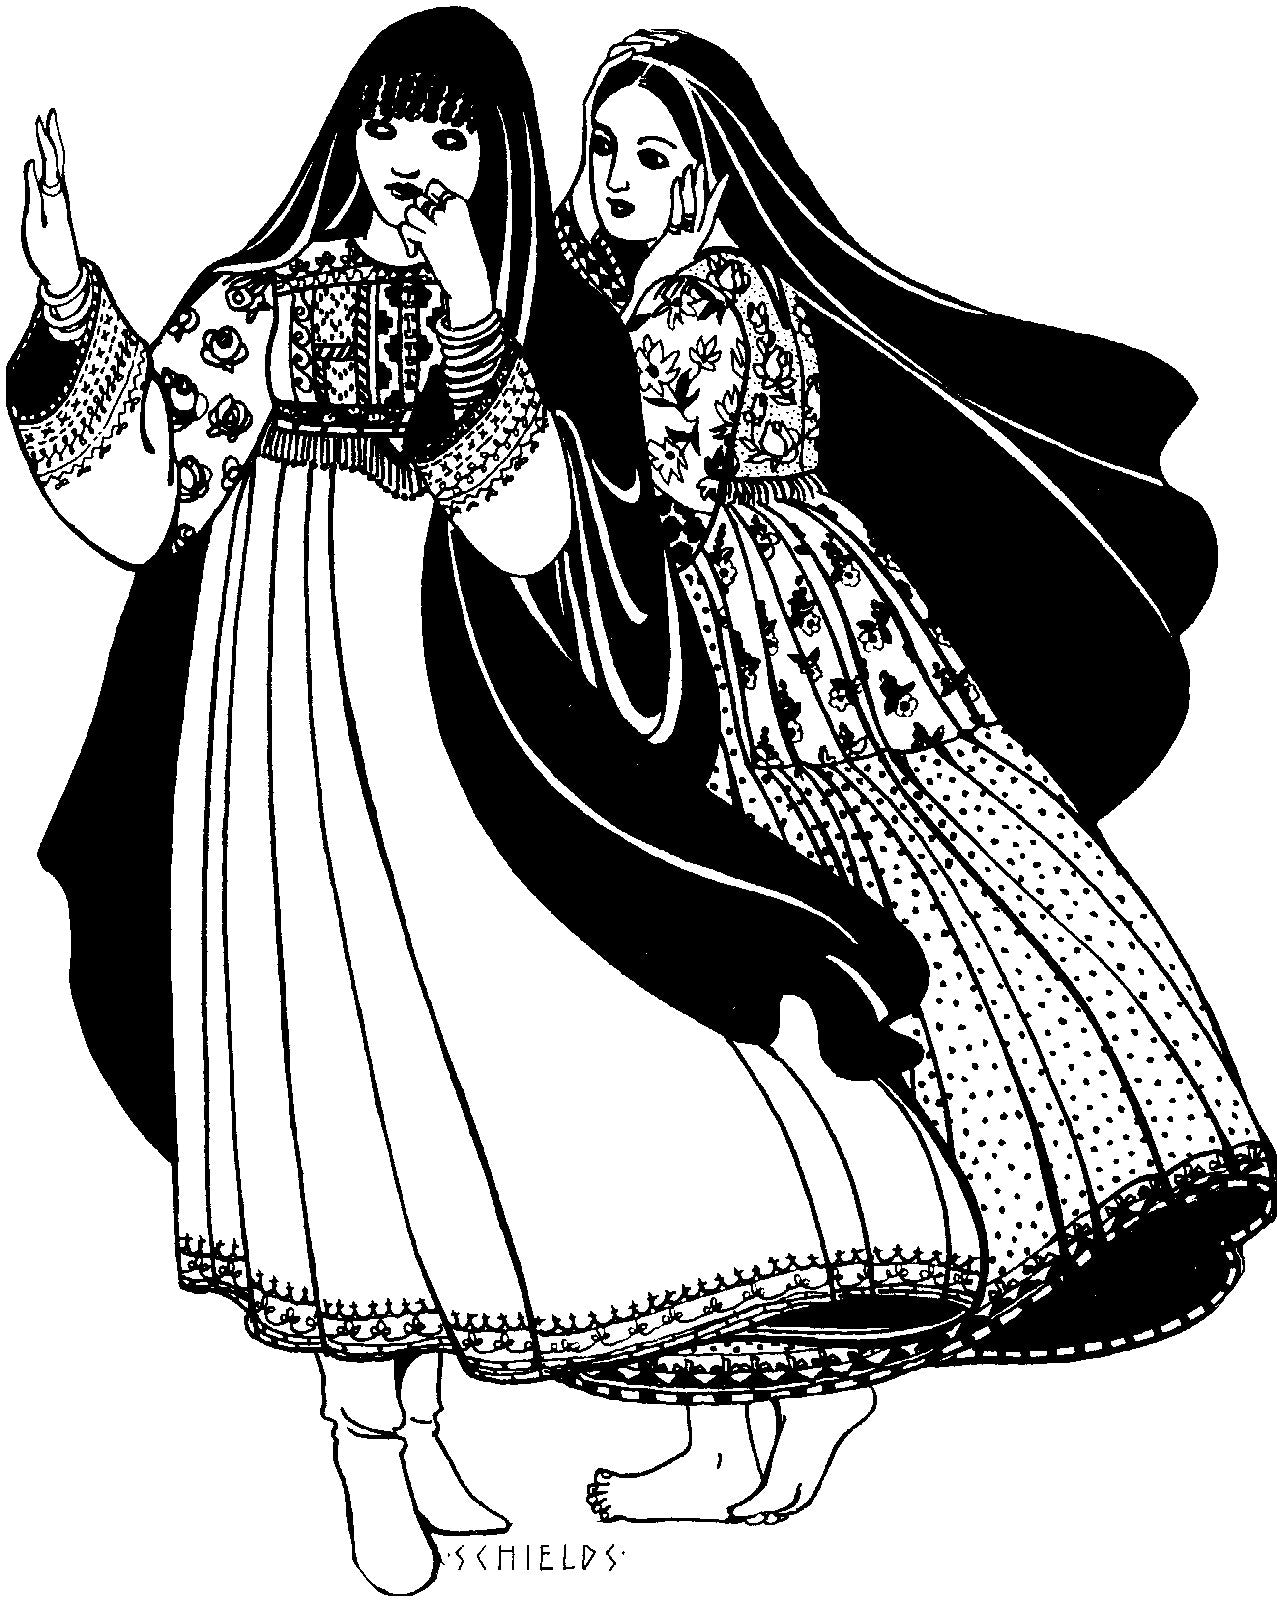 Pen and ink drawing by artist Gretchen Shields. Two women in traditional Afghan Nomad Dresses standing close to eachother.  Dress on woman on left has intricate bodice. The other woman's dress has floral fabric. Both have long head scarves flowing down their backs.